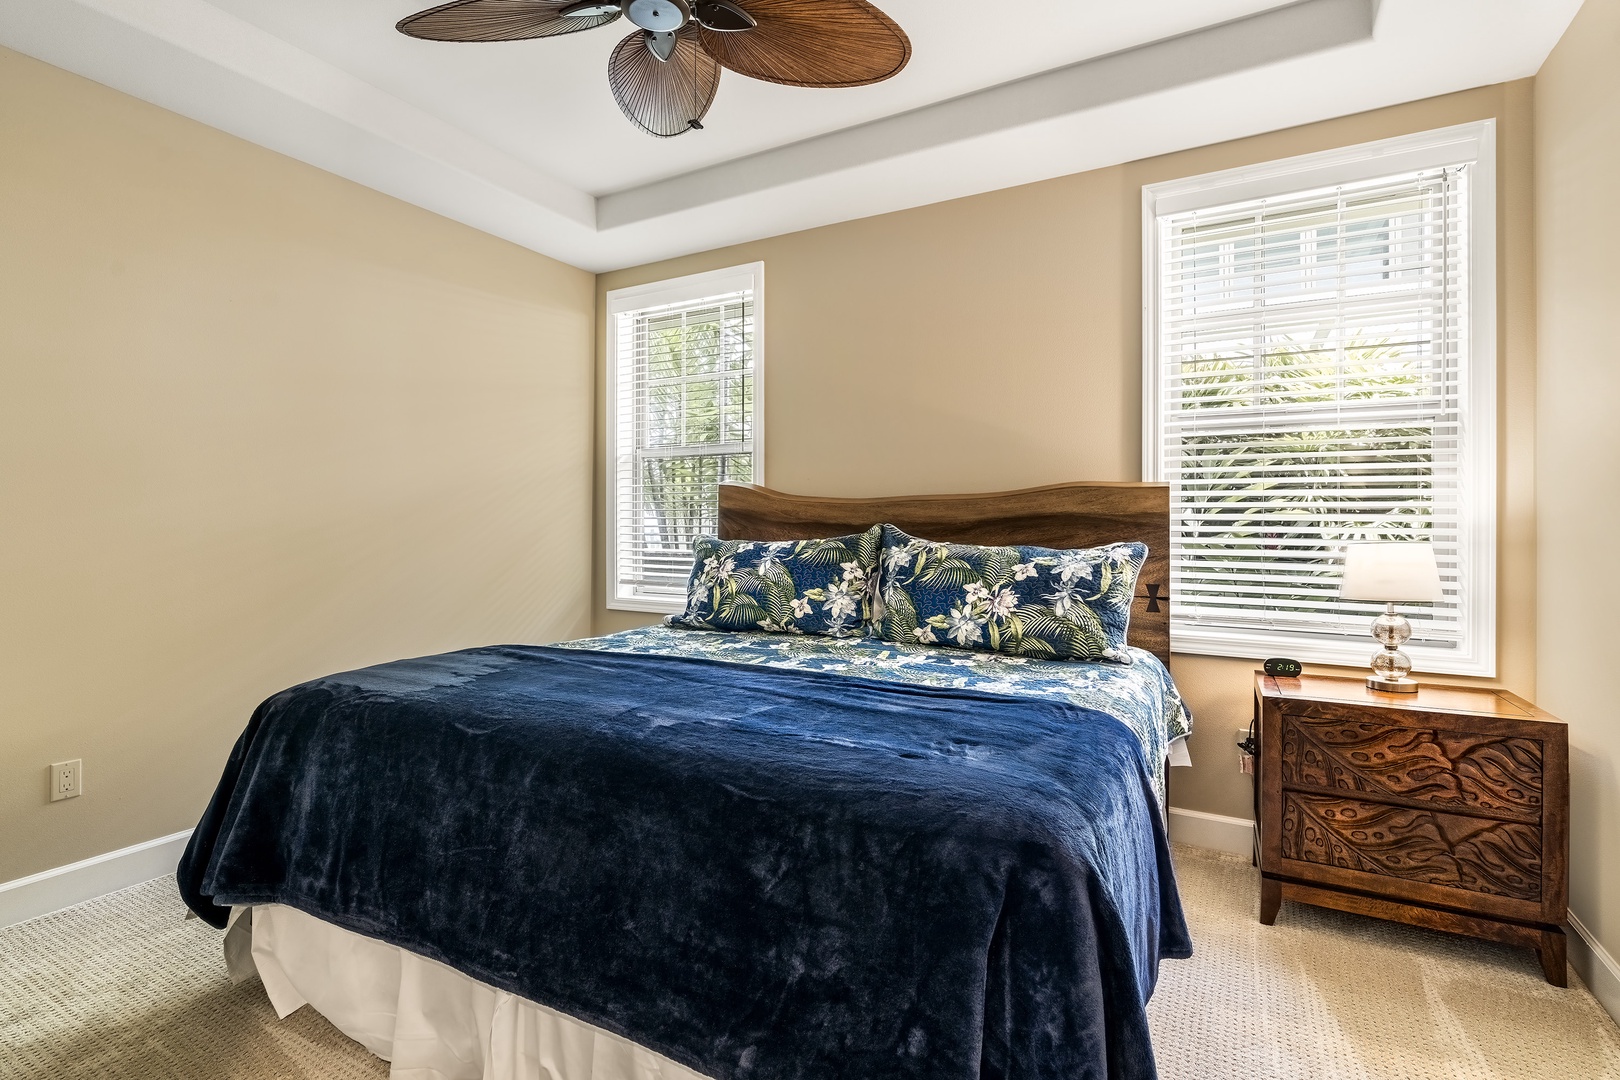 Kailua Kona Vacation Rentals, Blue Orca - Guest bedroom equipped with King bed, A/C, and TV